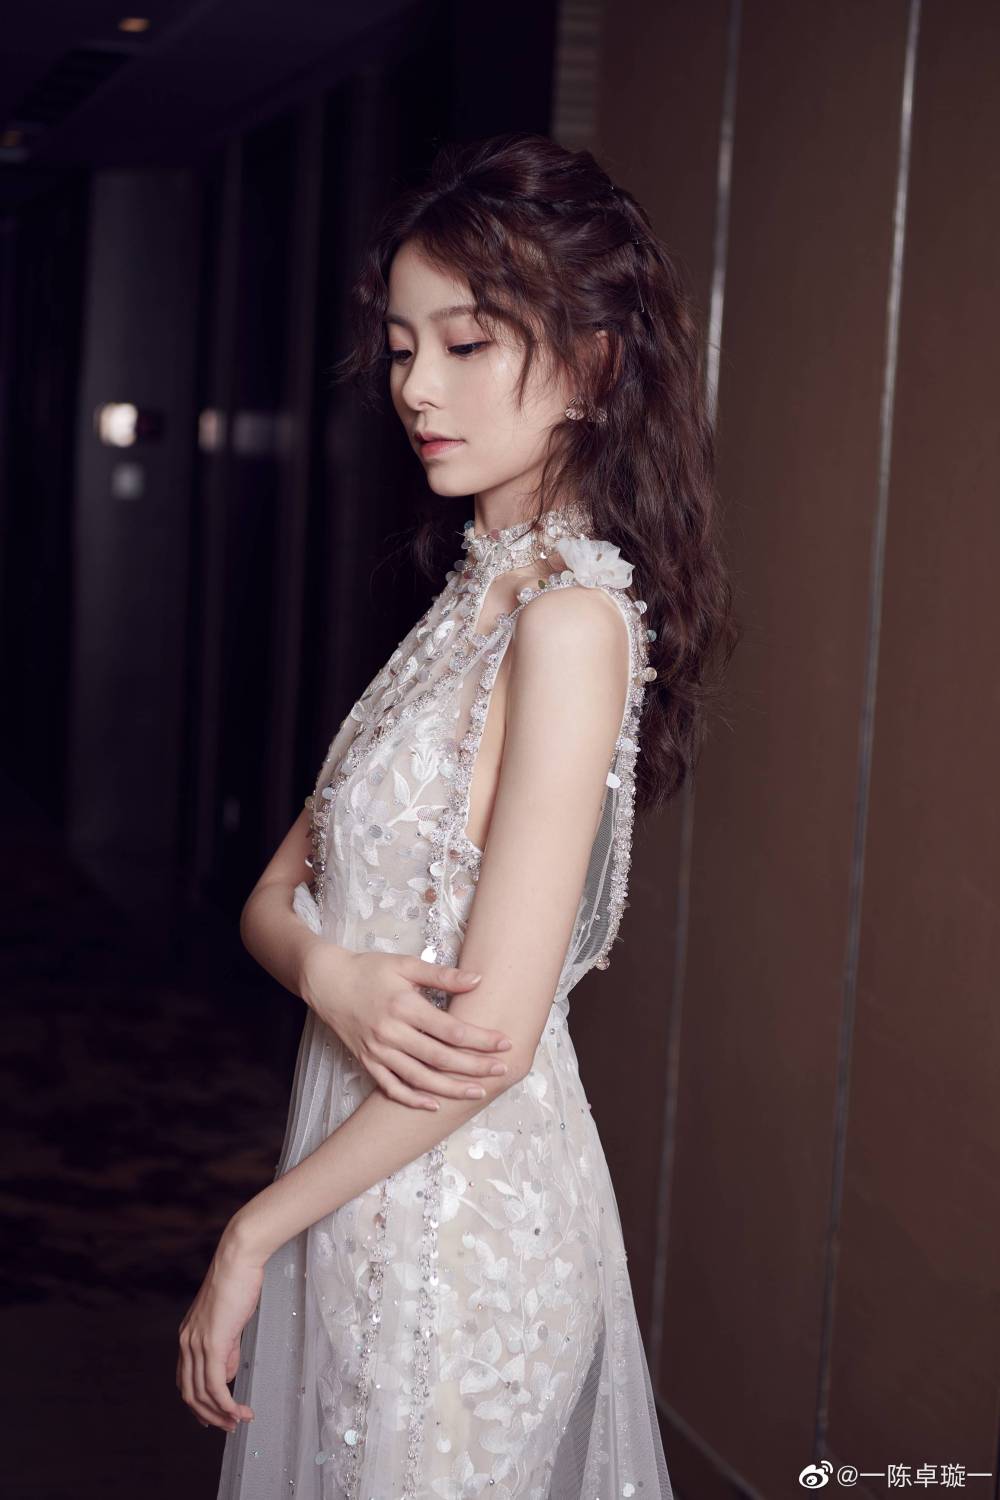 Zhuoxuan Chen Sexy and Hottest Photos , Latest Pics